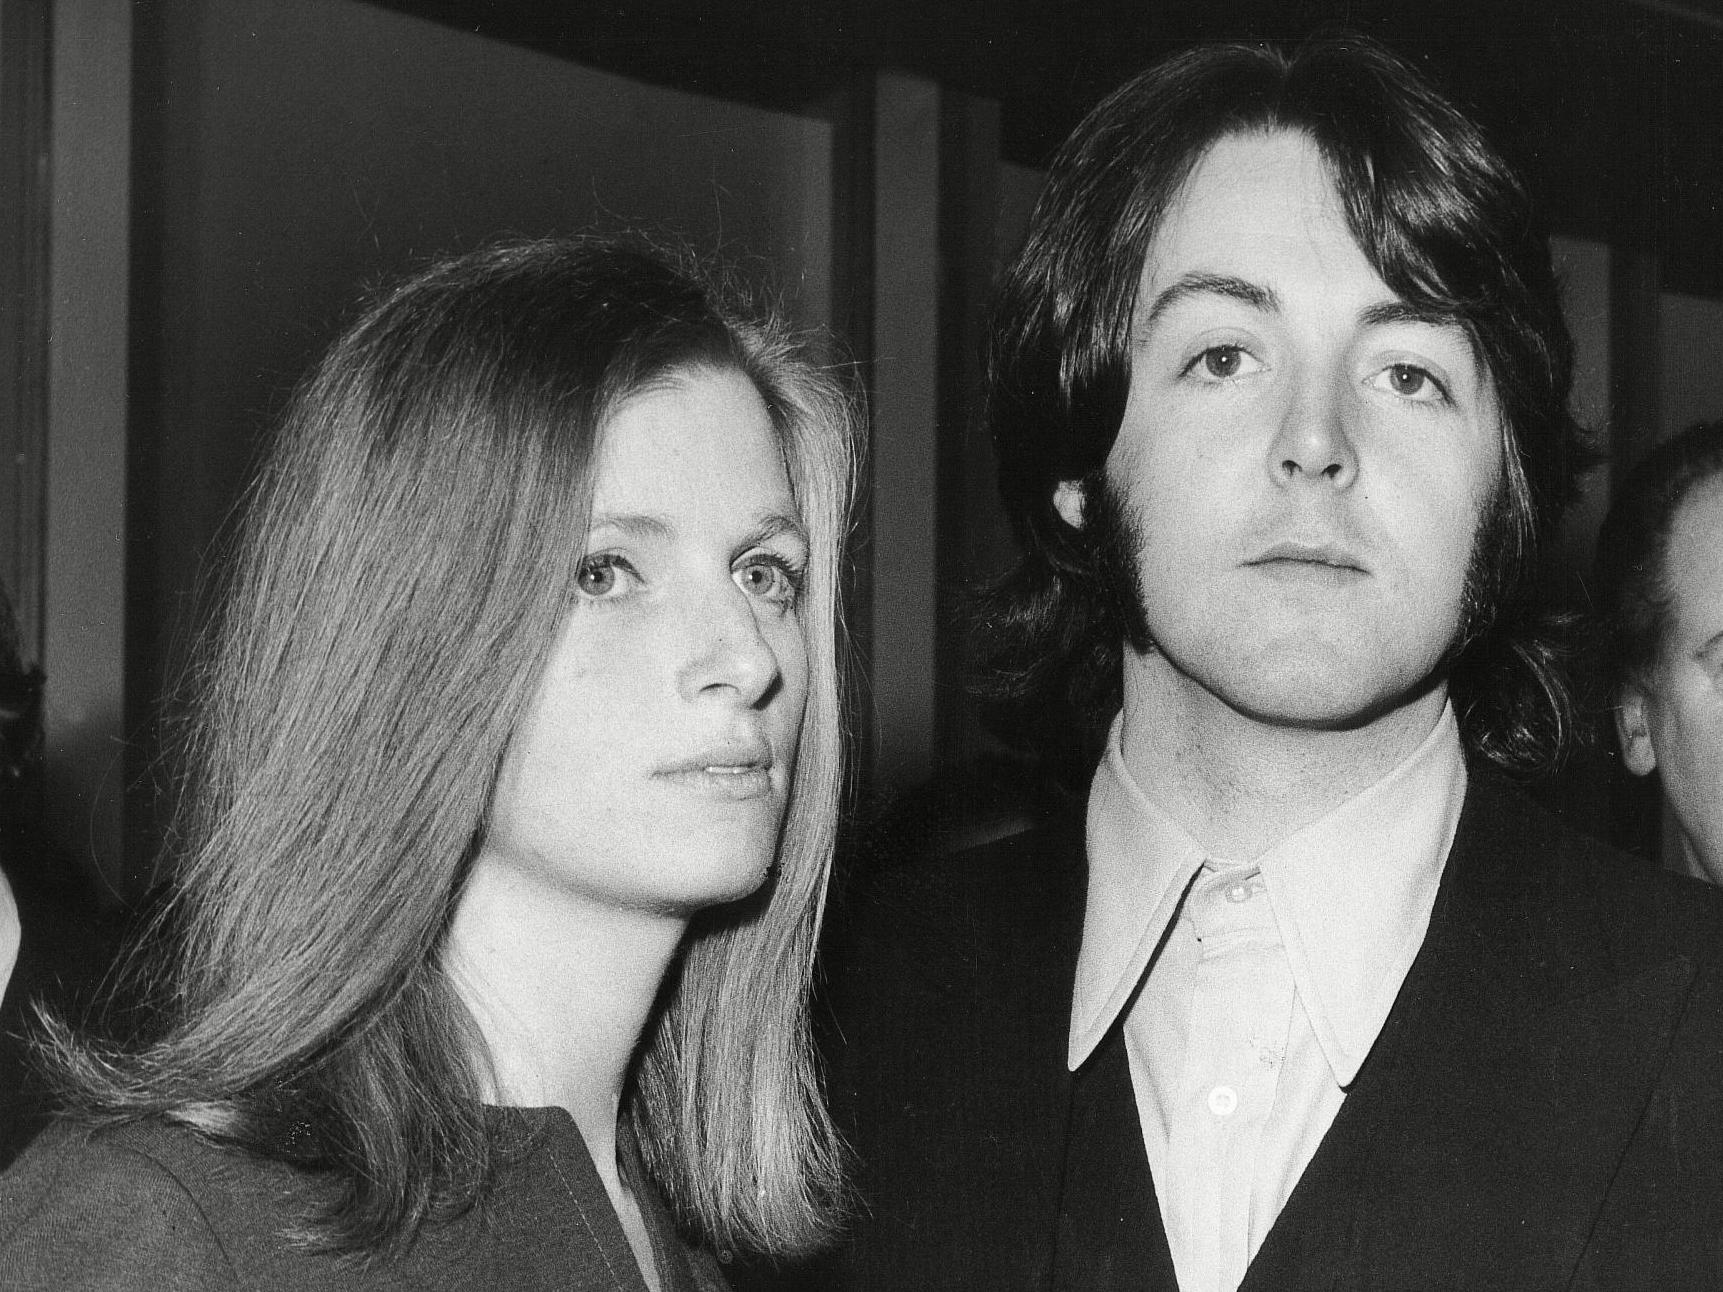 Paul McCartney and future wife Linda attend a music event in 1969